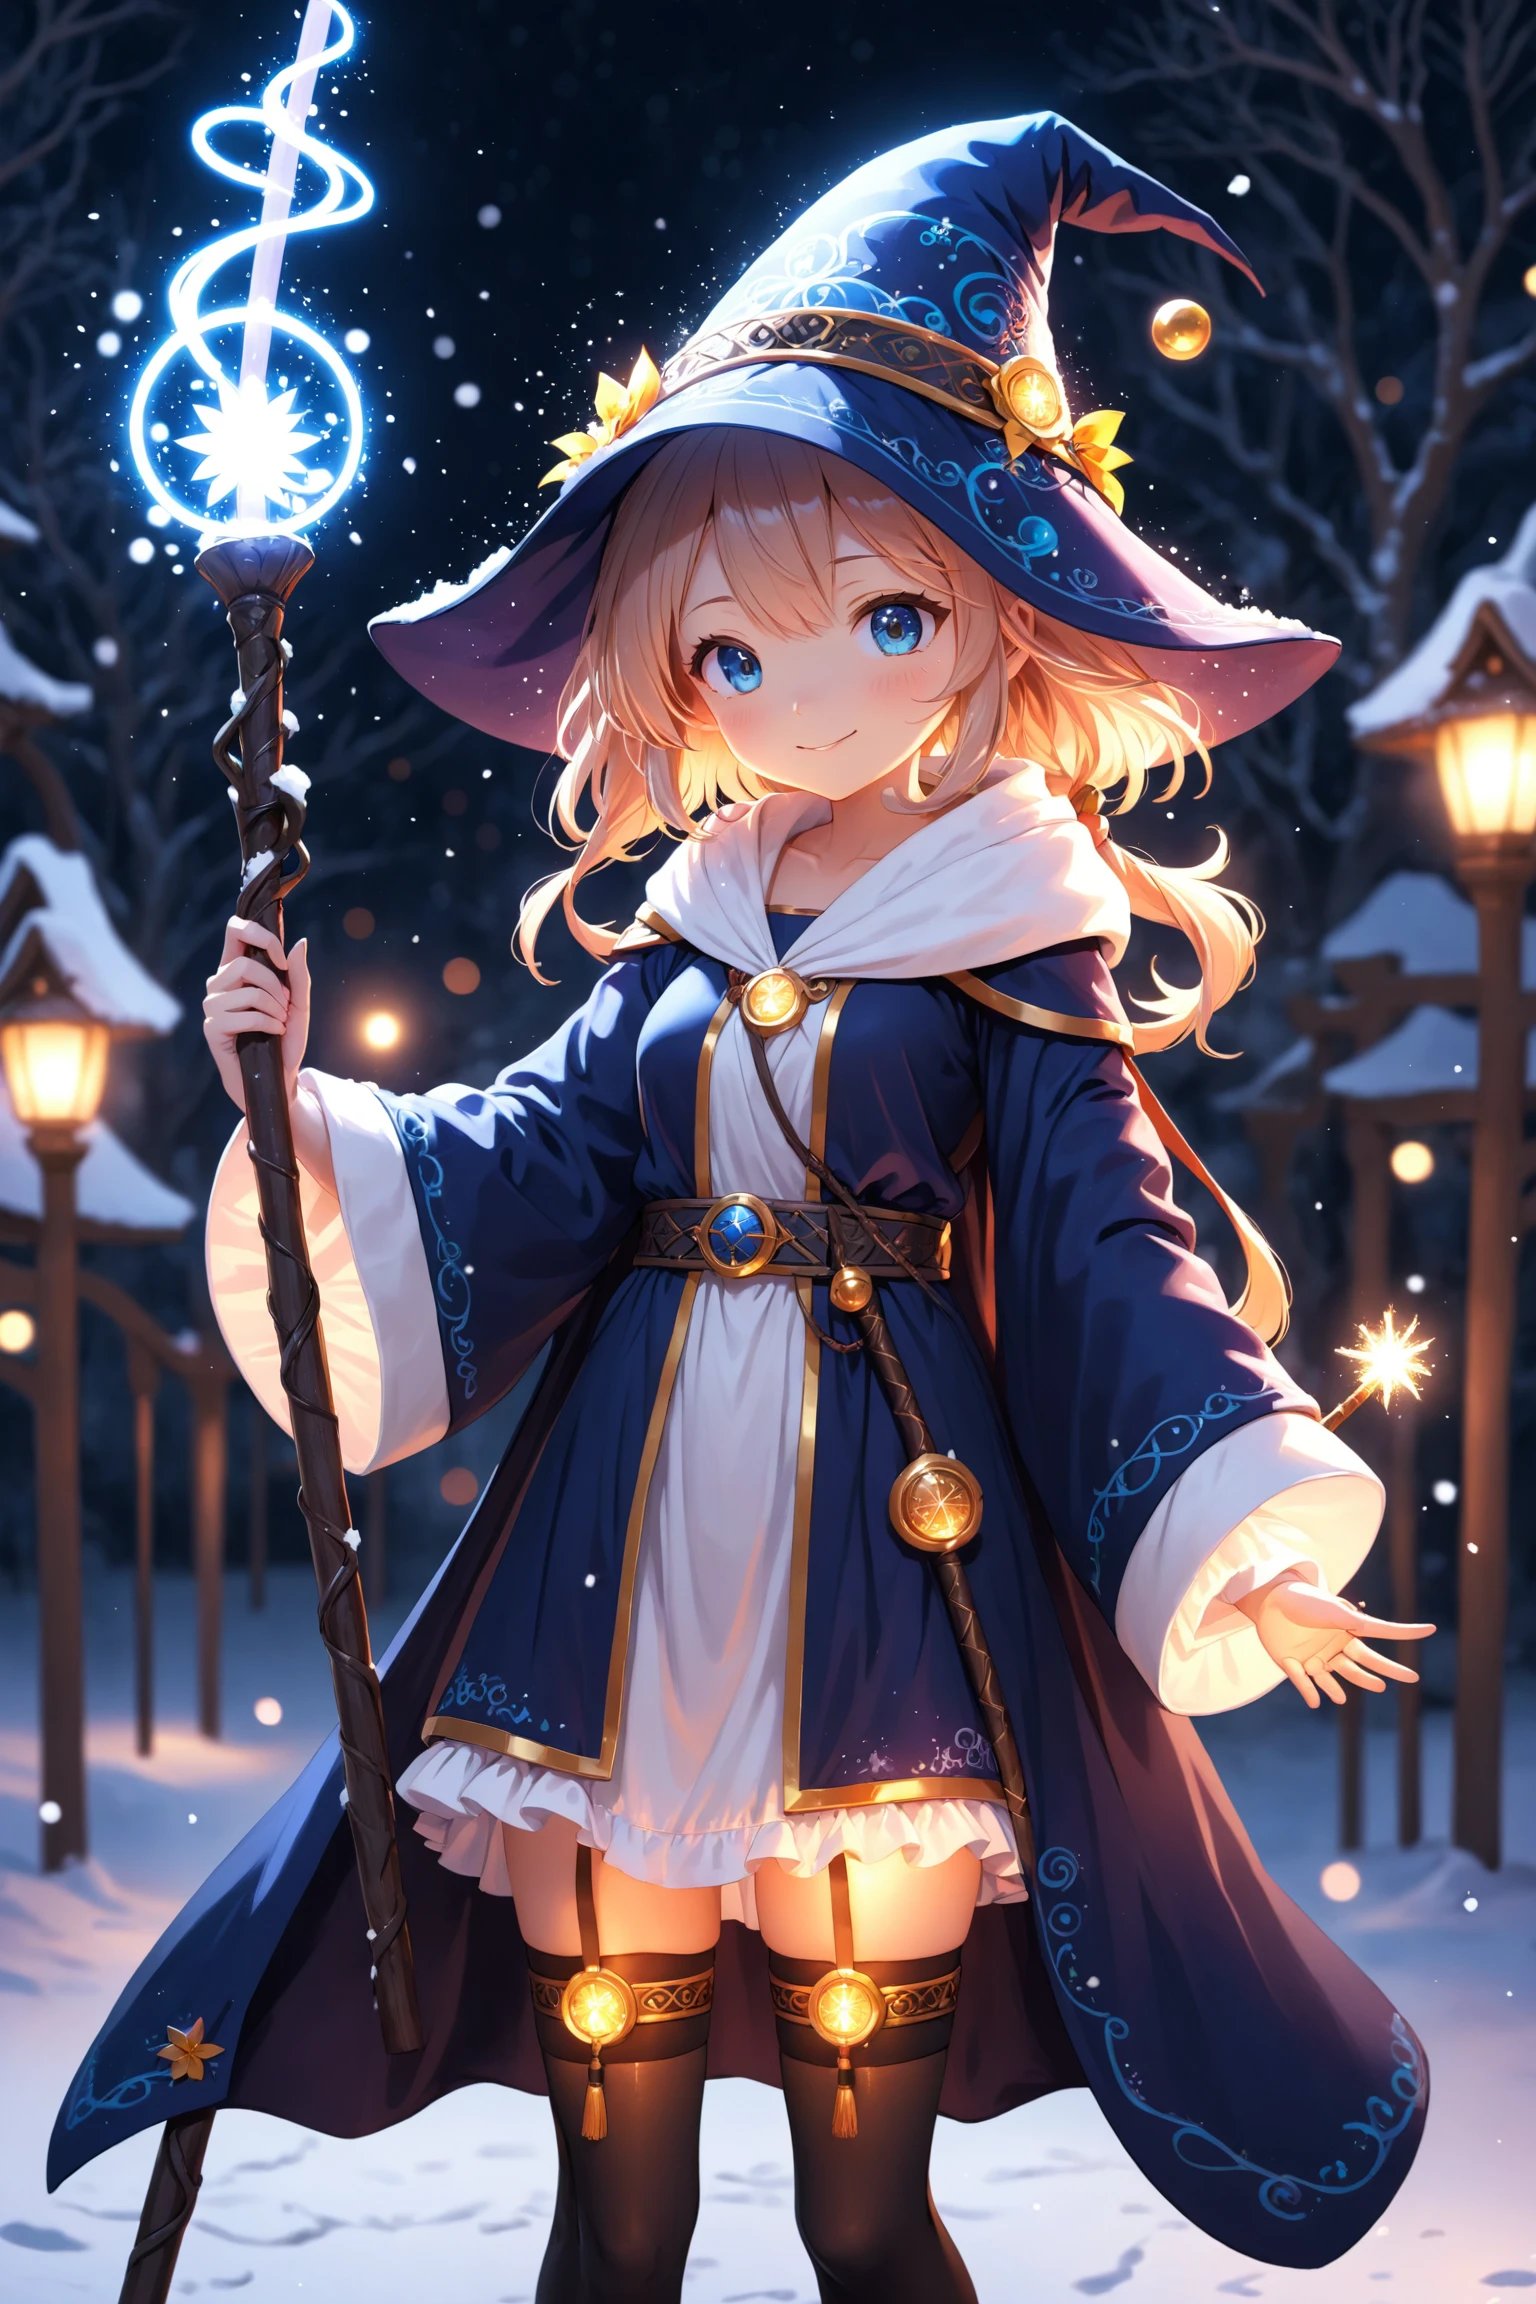 anime, cute girl, wizard hat, robe, thigh-highs, holding ancient staff, happy, midnight, bloom, ambient occlusion, glow, glowing lights, light particles, transparent, translucent, bokeh, depth of field, snow, wind